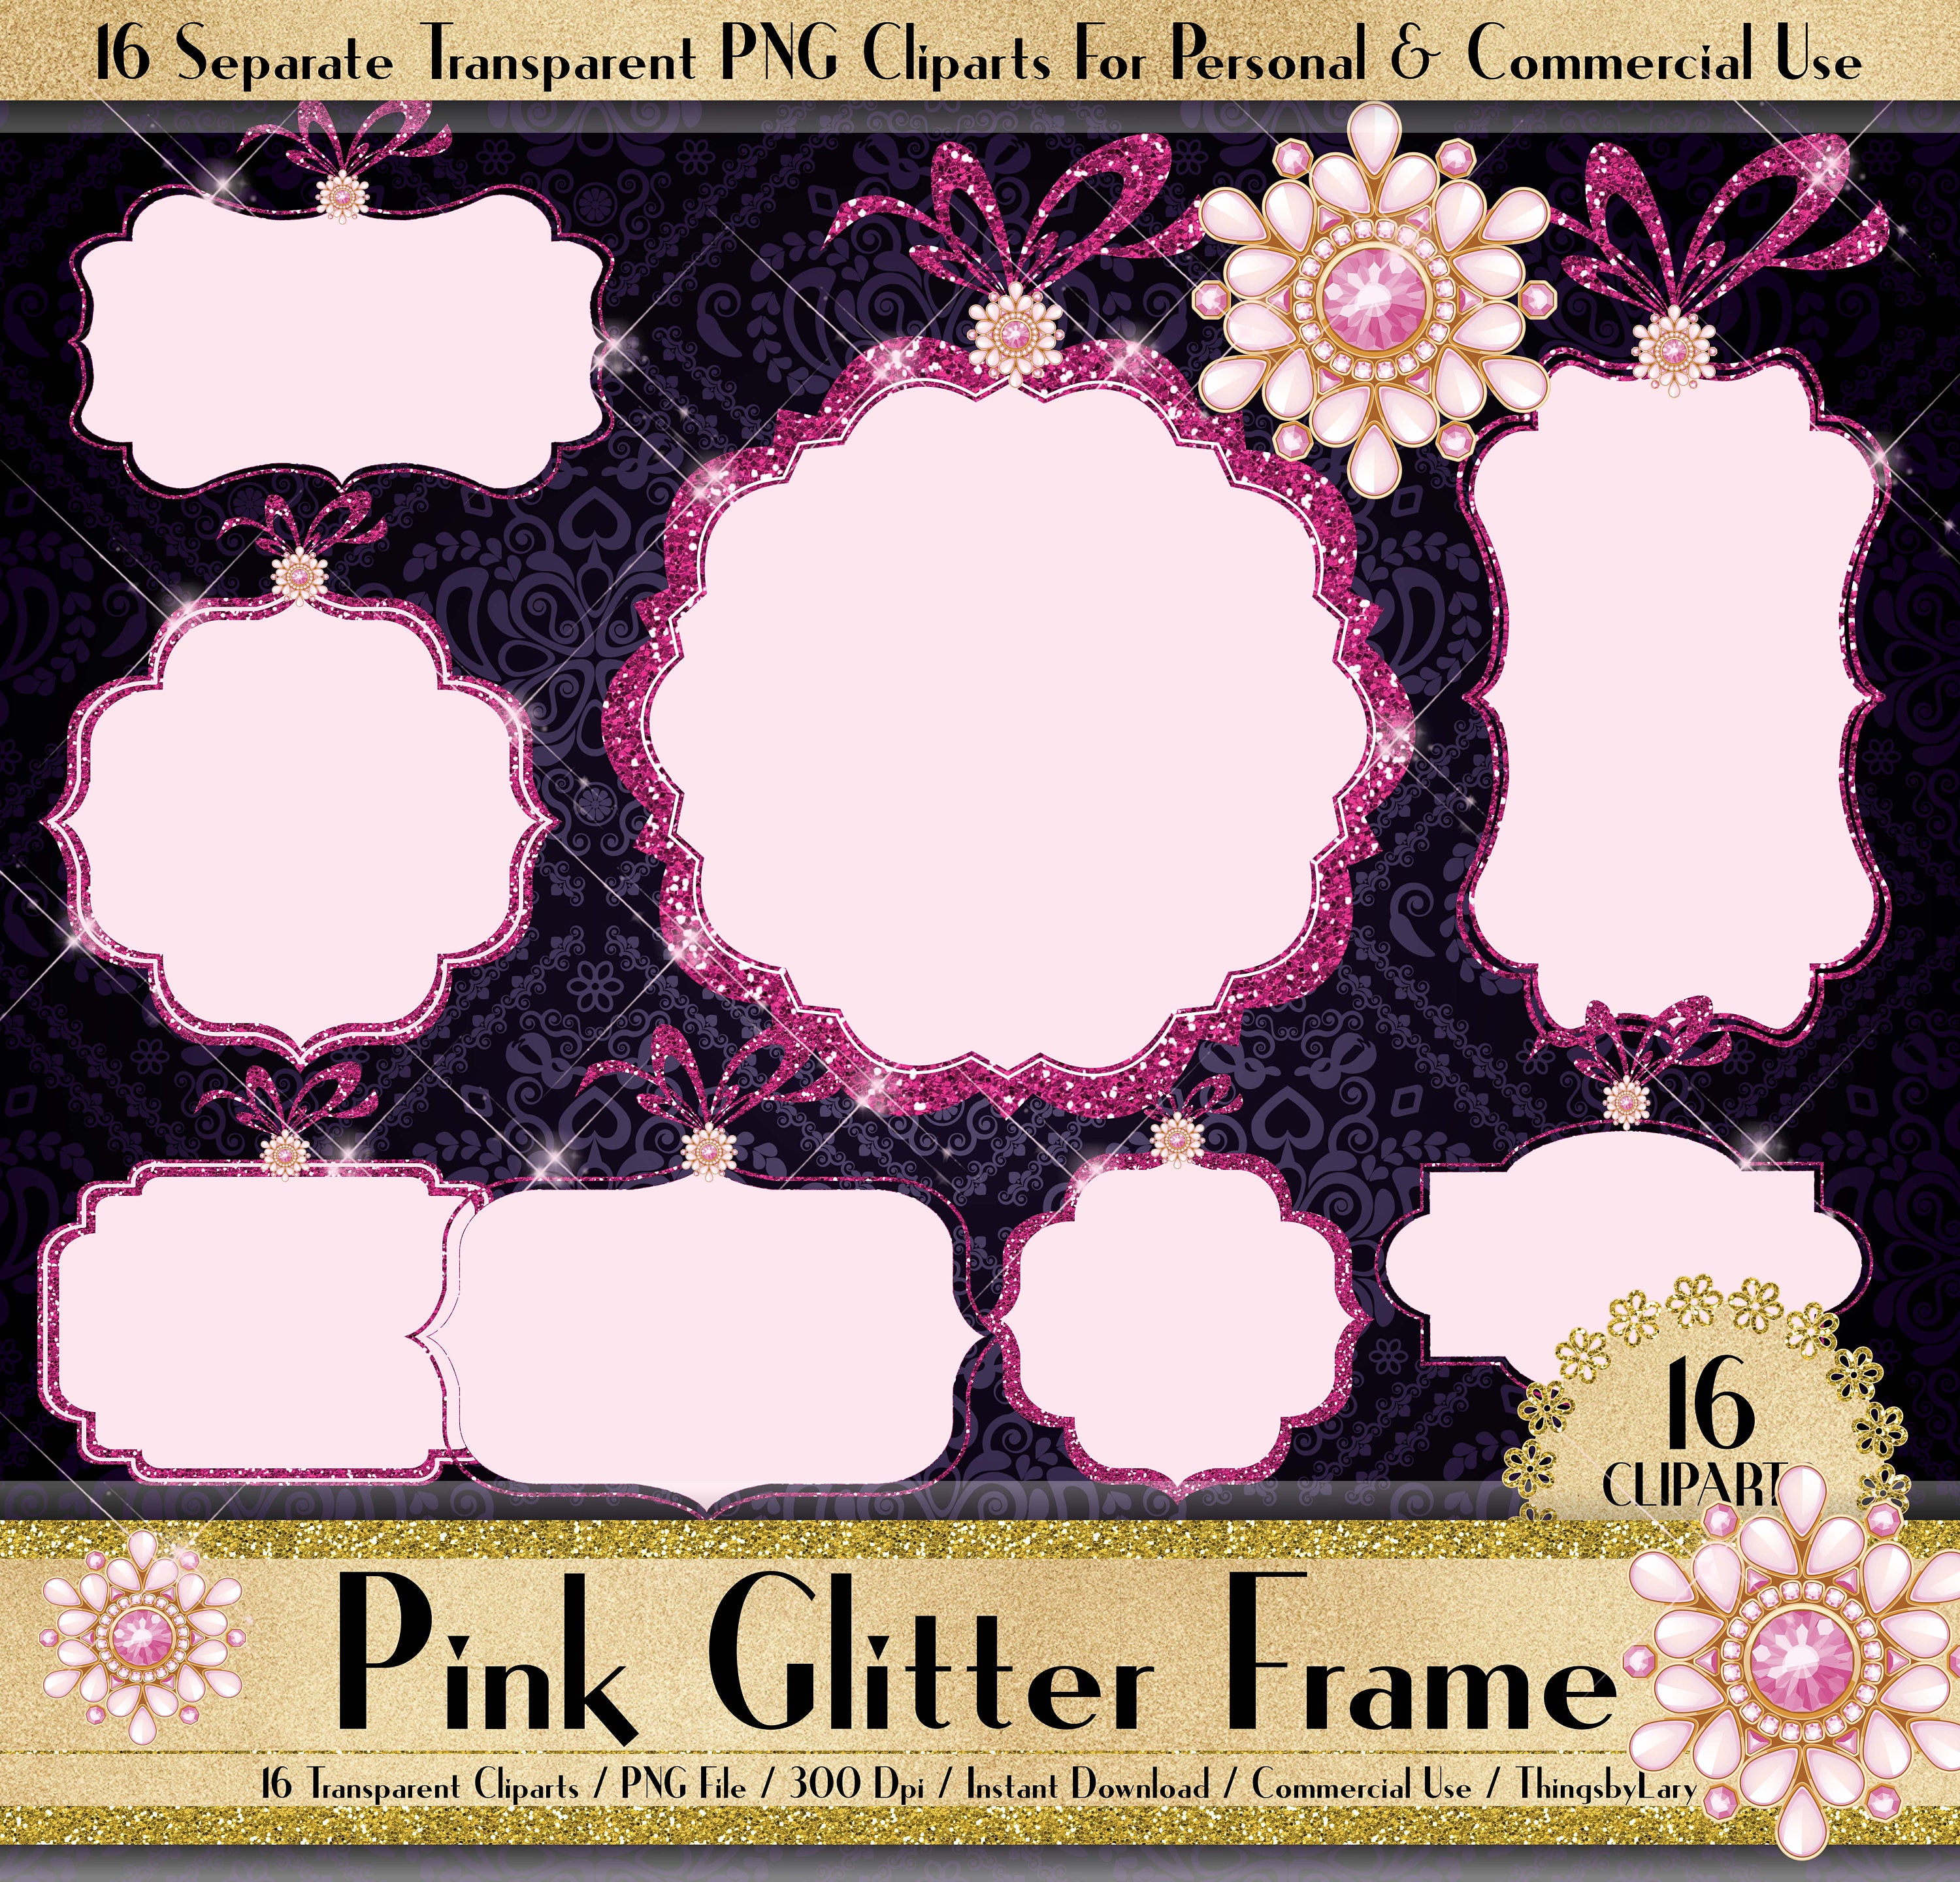 Pink Glitter and Jewelry Frame, Sparkle Frame Clipart, Glitter Frame for Royal, Christmas, Instant download,Commercial Use, Planner Clipart